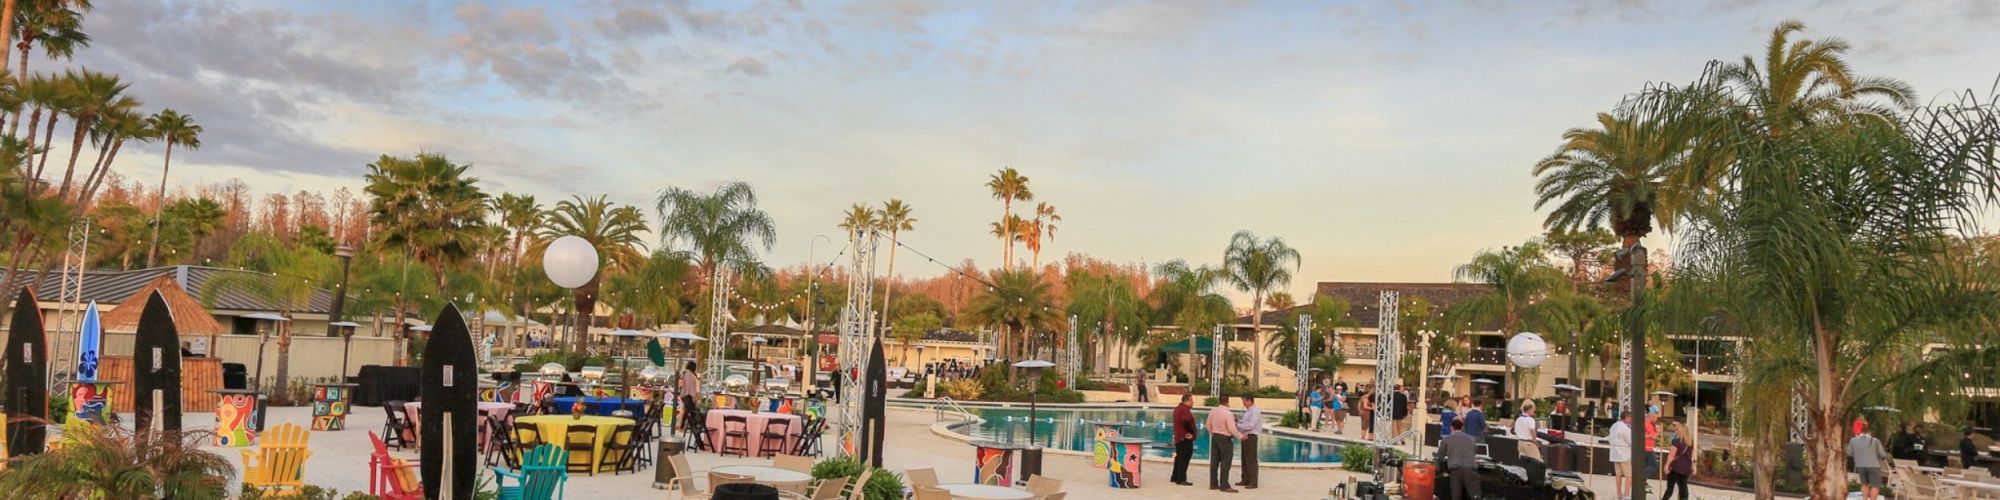 The image shows an outdoor event by a resort pool with people, tables, chairs, and palm trees, under a partly cloudy sky during sunset.